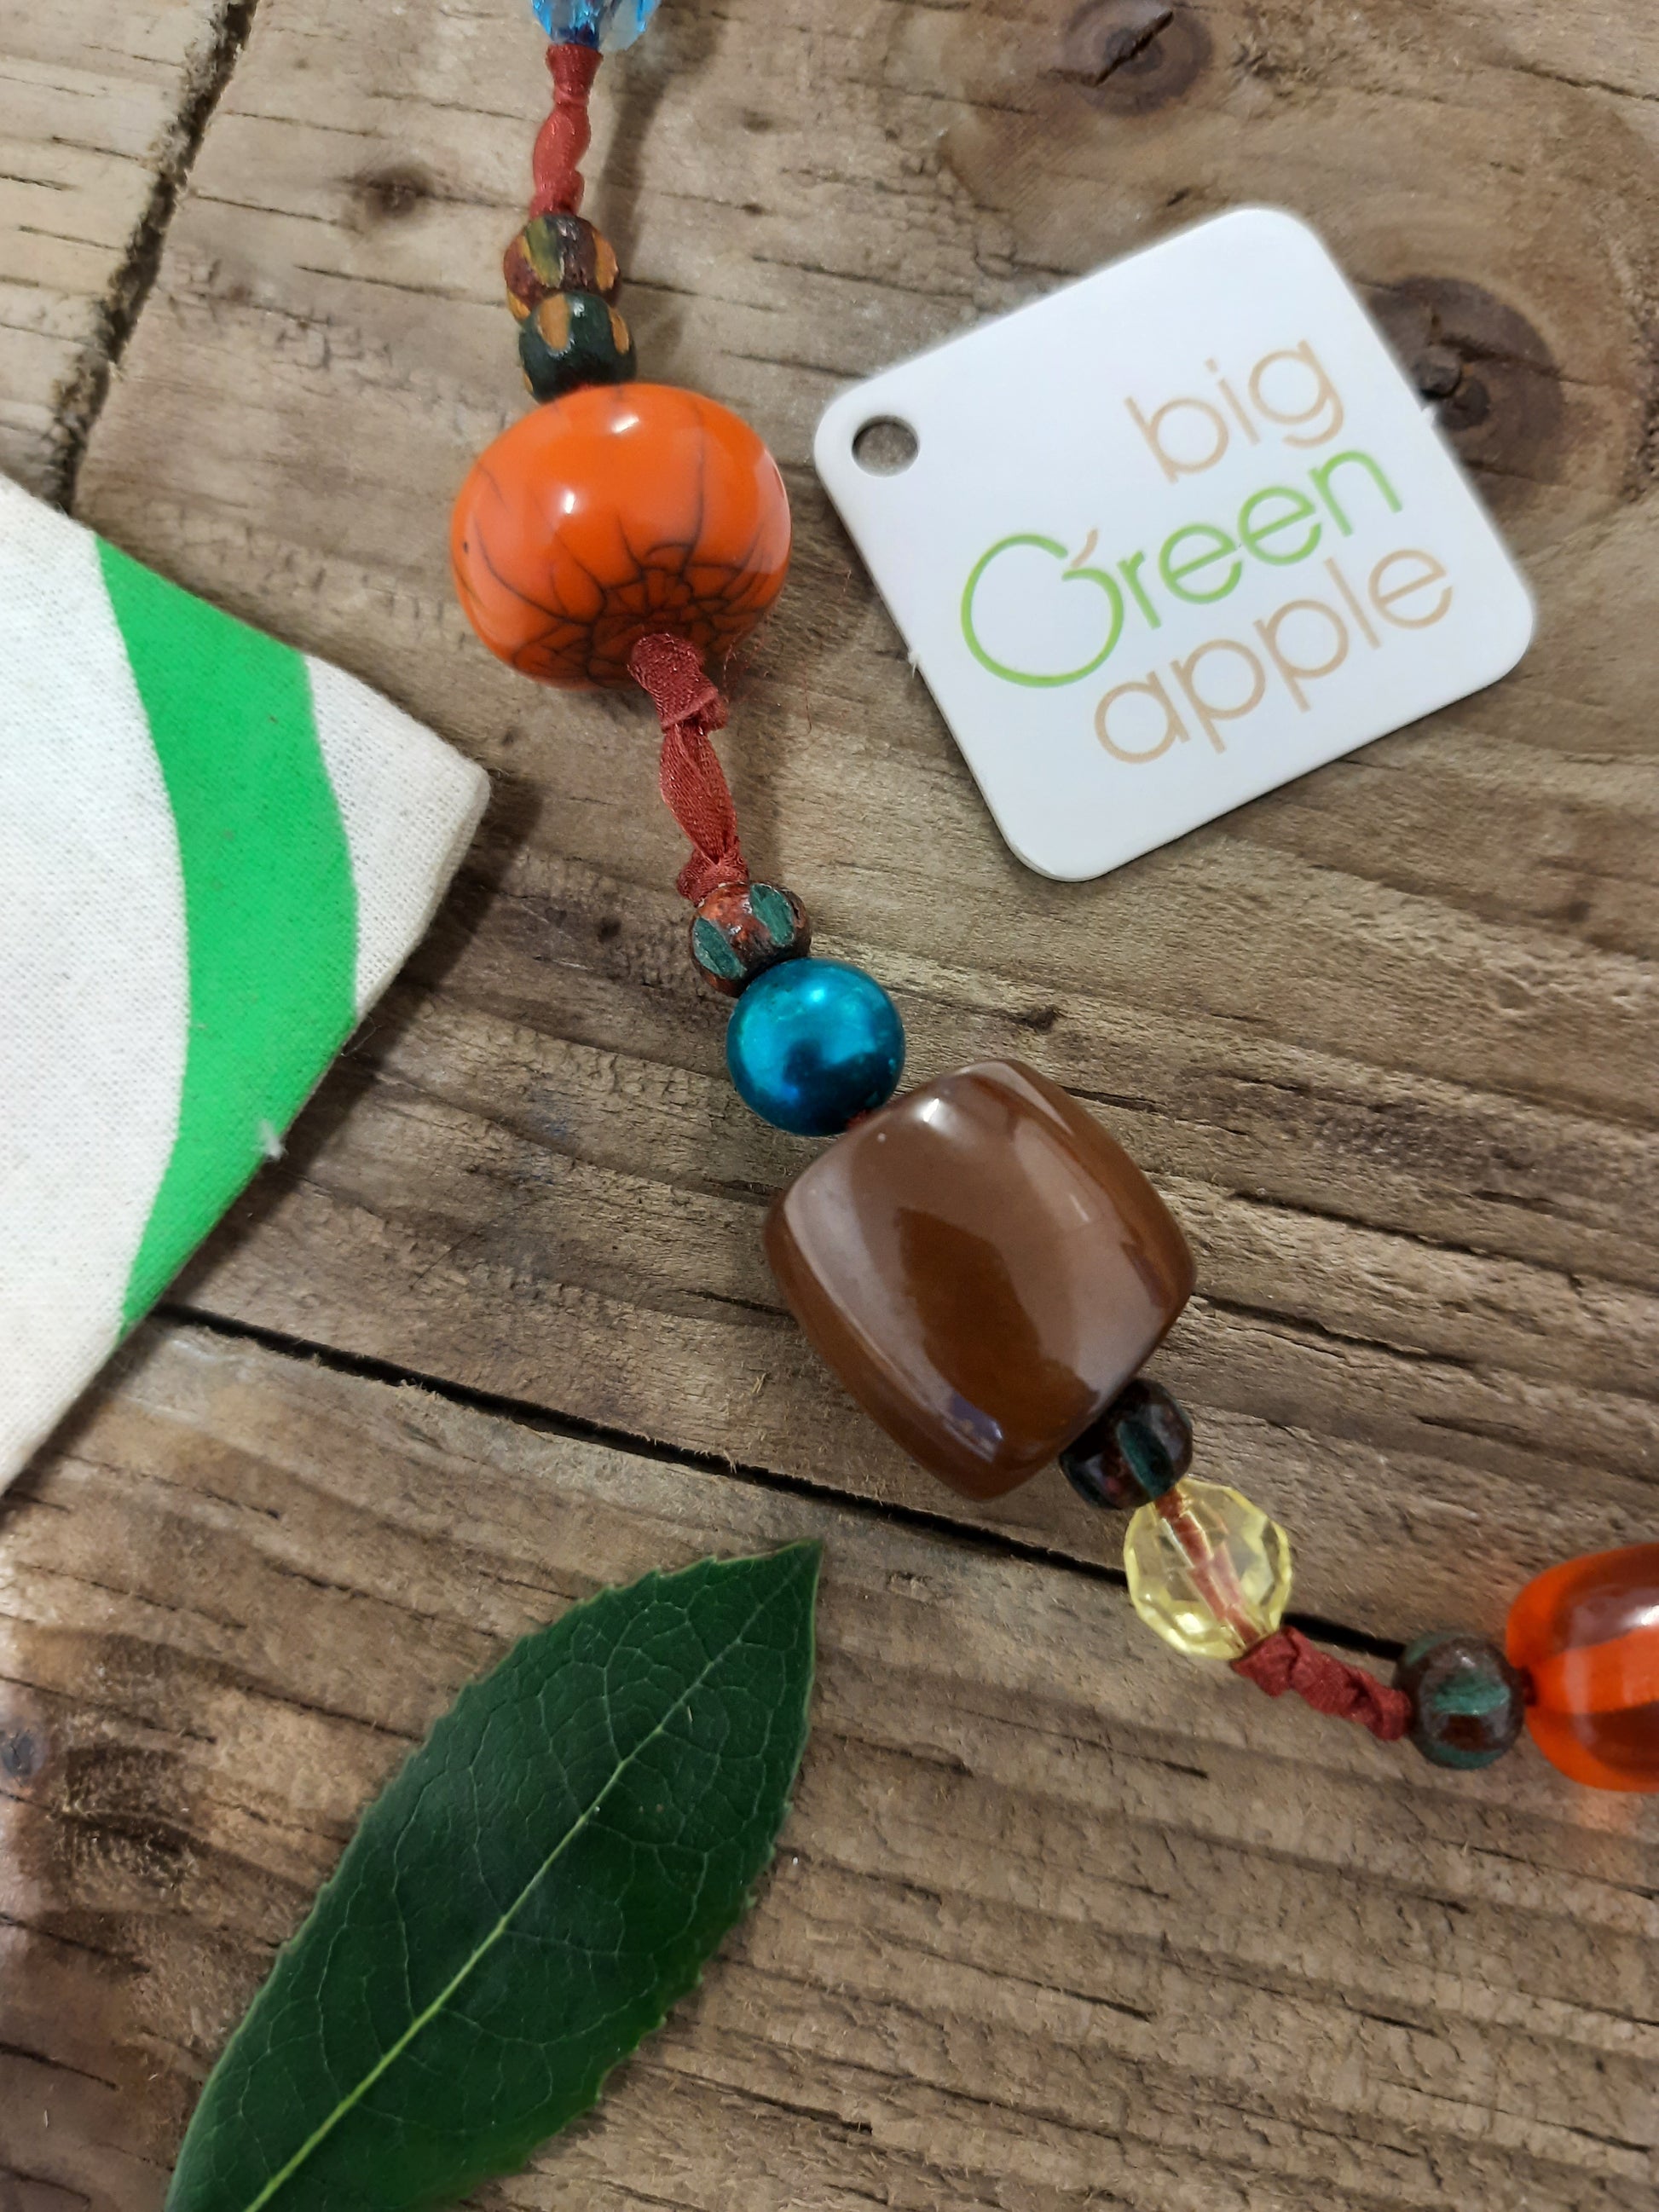 Necklace, Fair Trade Necklace, Gifts For Mom, Jewellery Set, Sustainable Gifts UK, Eco Friendly Gift Ideas, BIG GREEN APPLE 